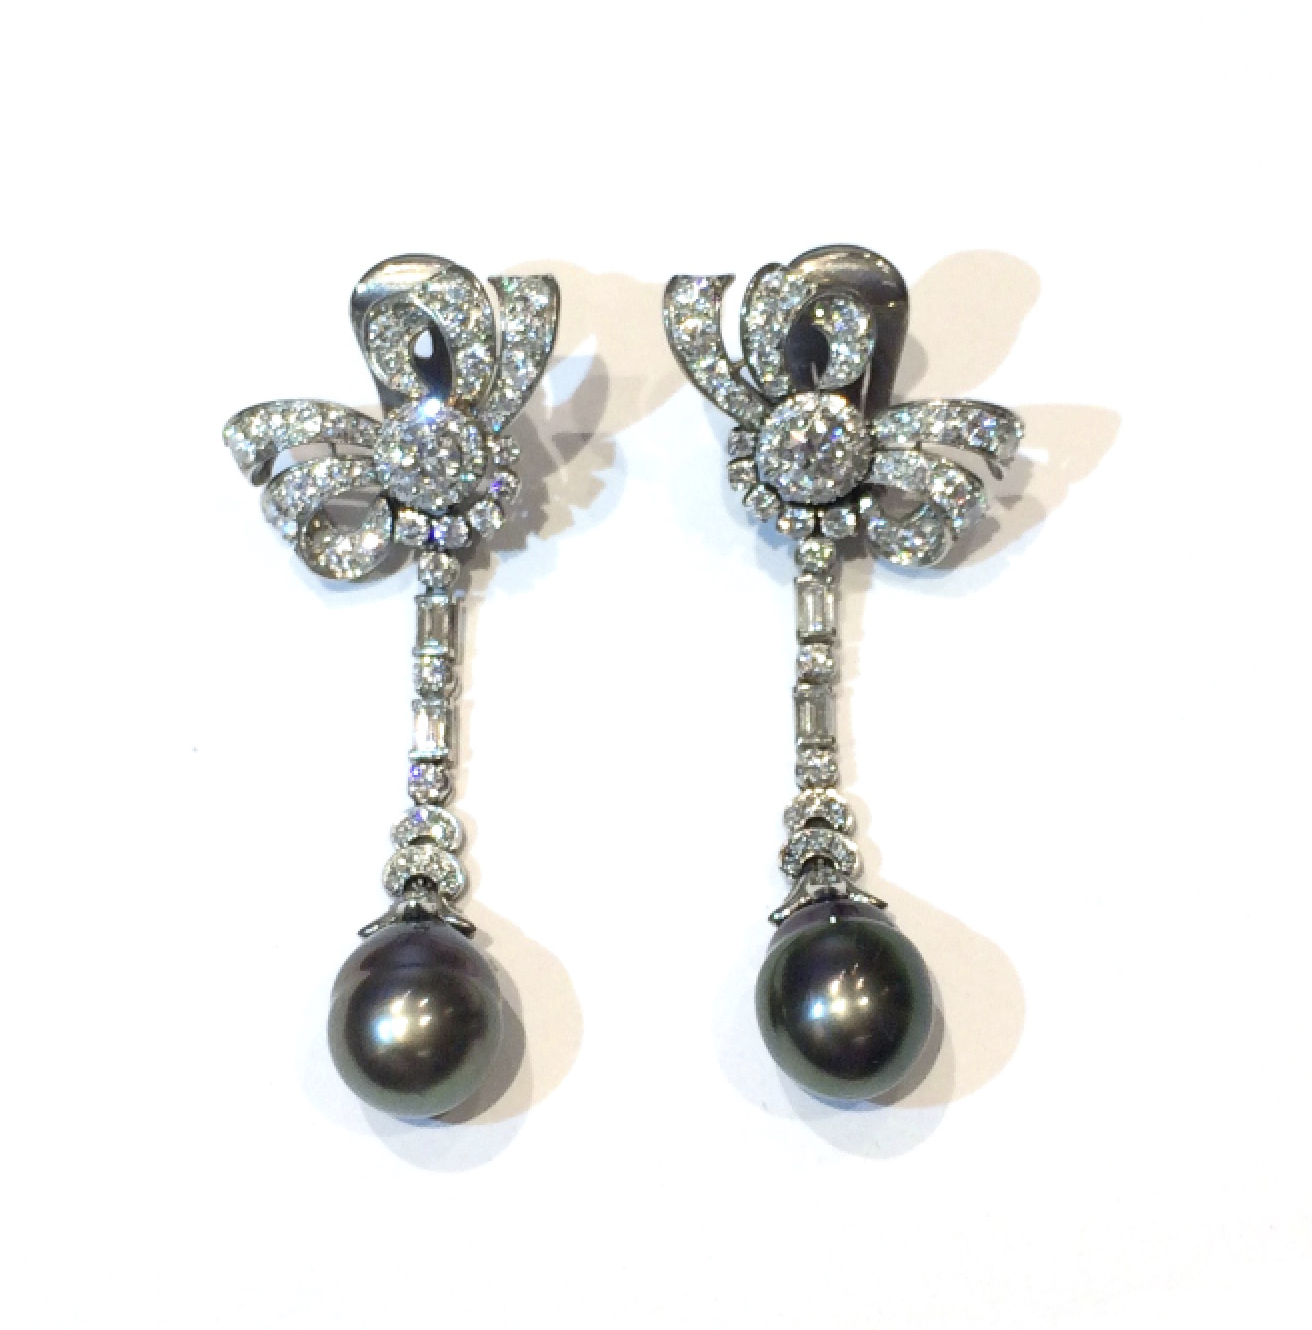 American “Night & Day” pendant earrings, two black pearls suspended from fancy detachable pendants with a bow motif earrings all set in platinum with approx. 134 round diamonds and four baguette diamonds (approx. 8 carats TW), c. 1935